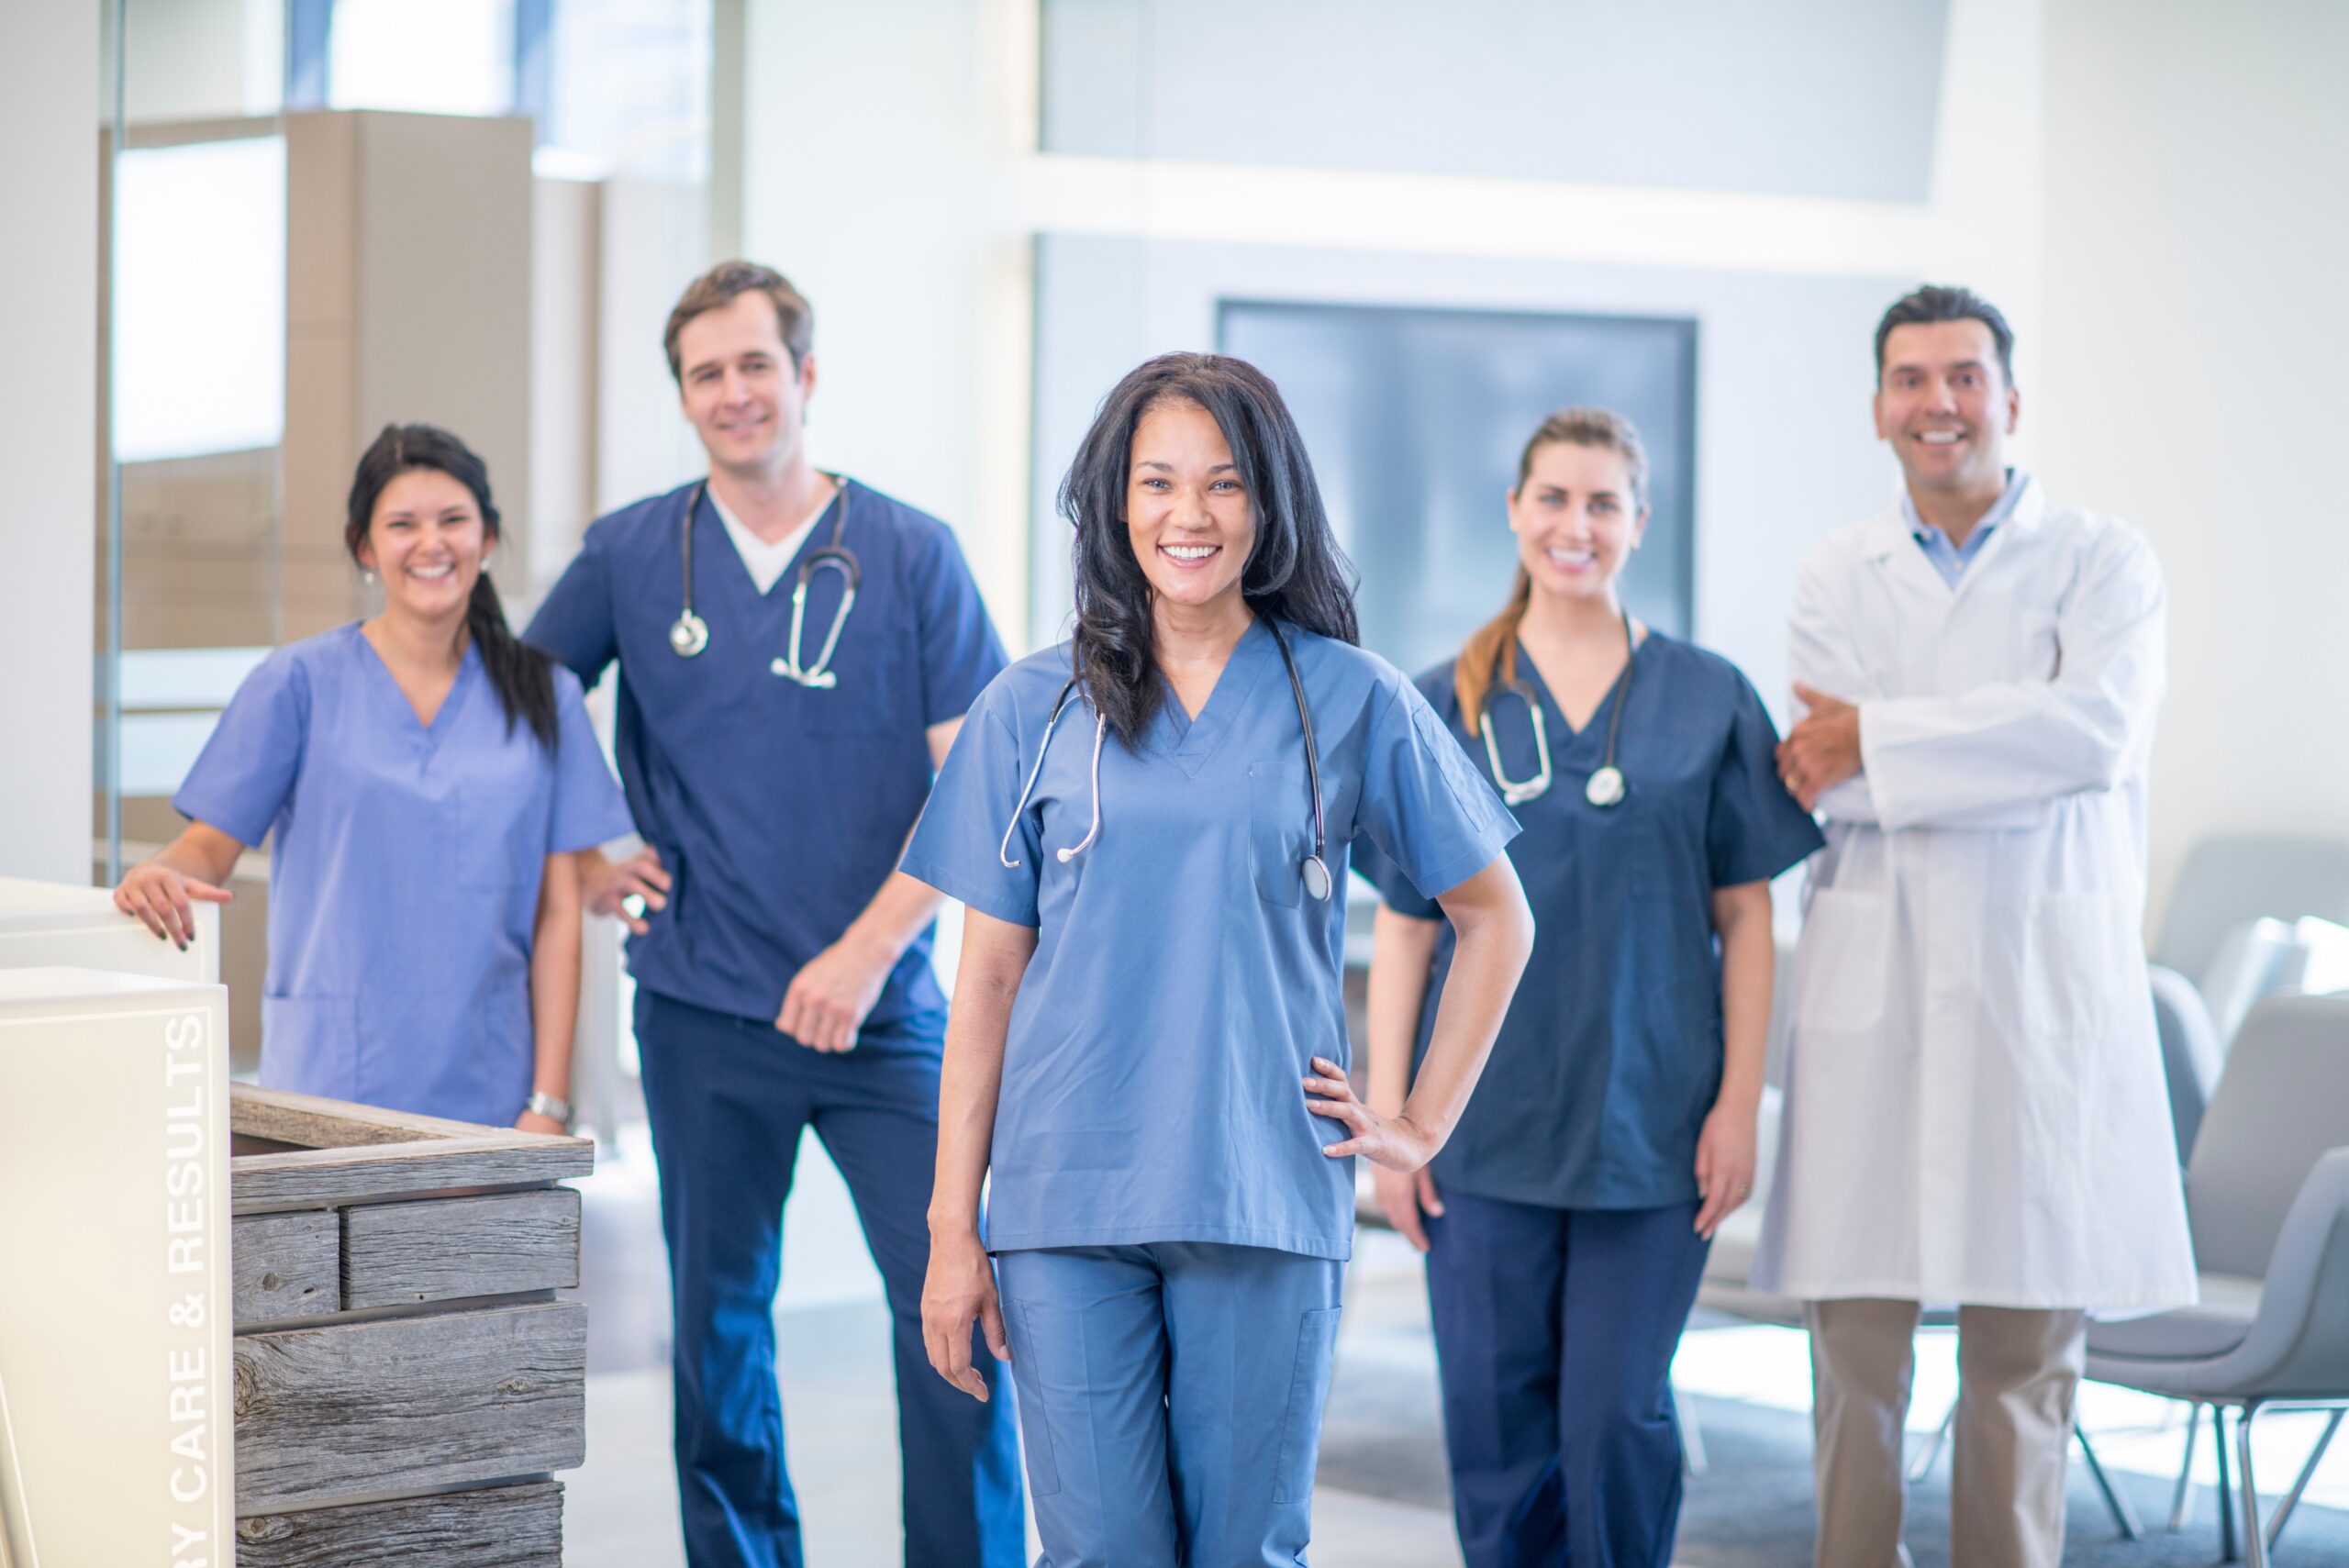 Learn how Perioperative Optimization with tools like Merlin can streamline scheduling and staffing, saving time and money.